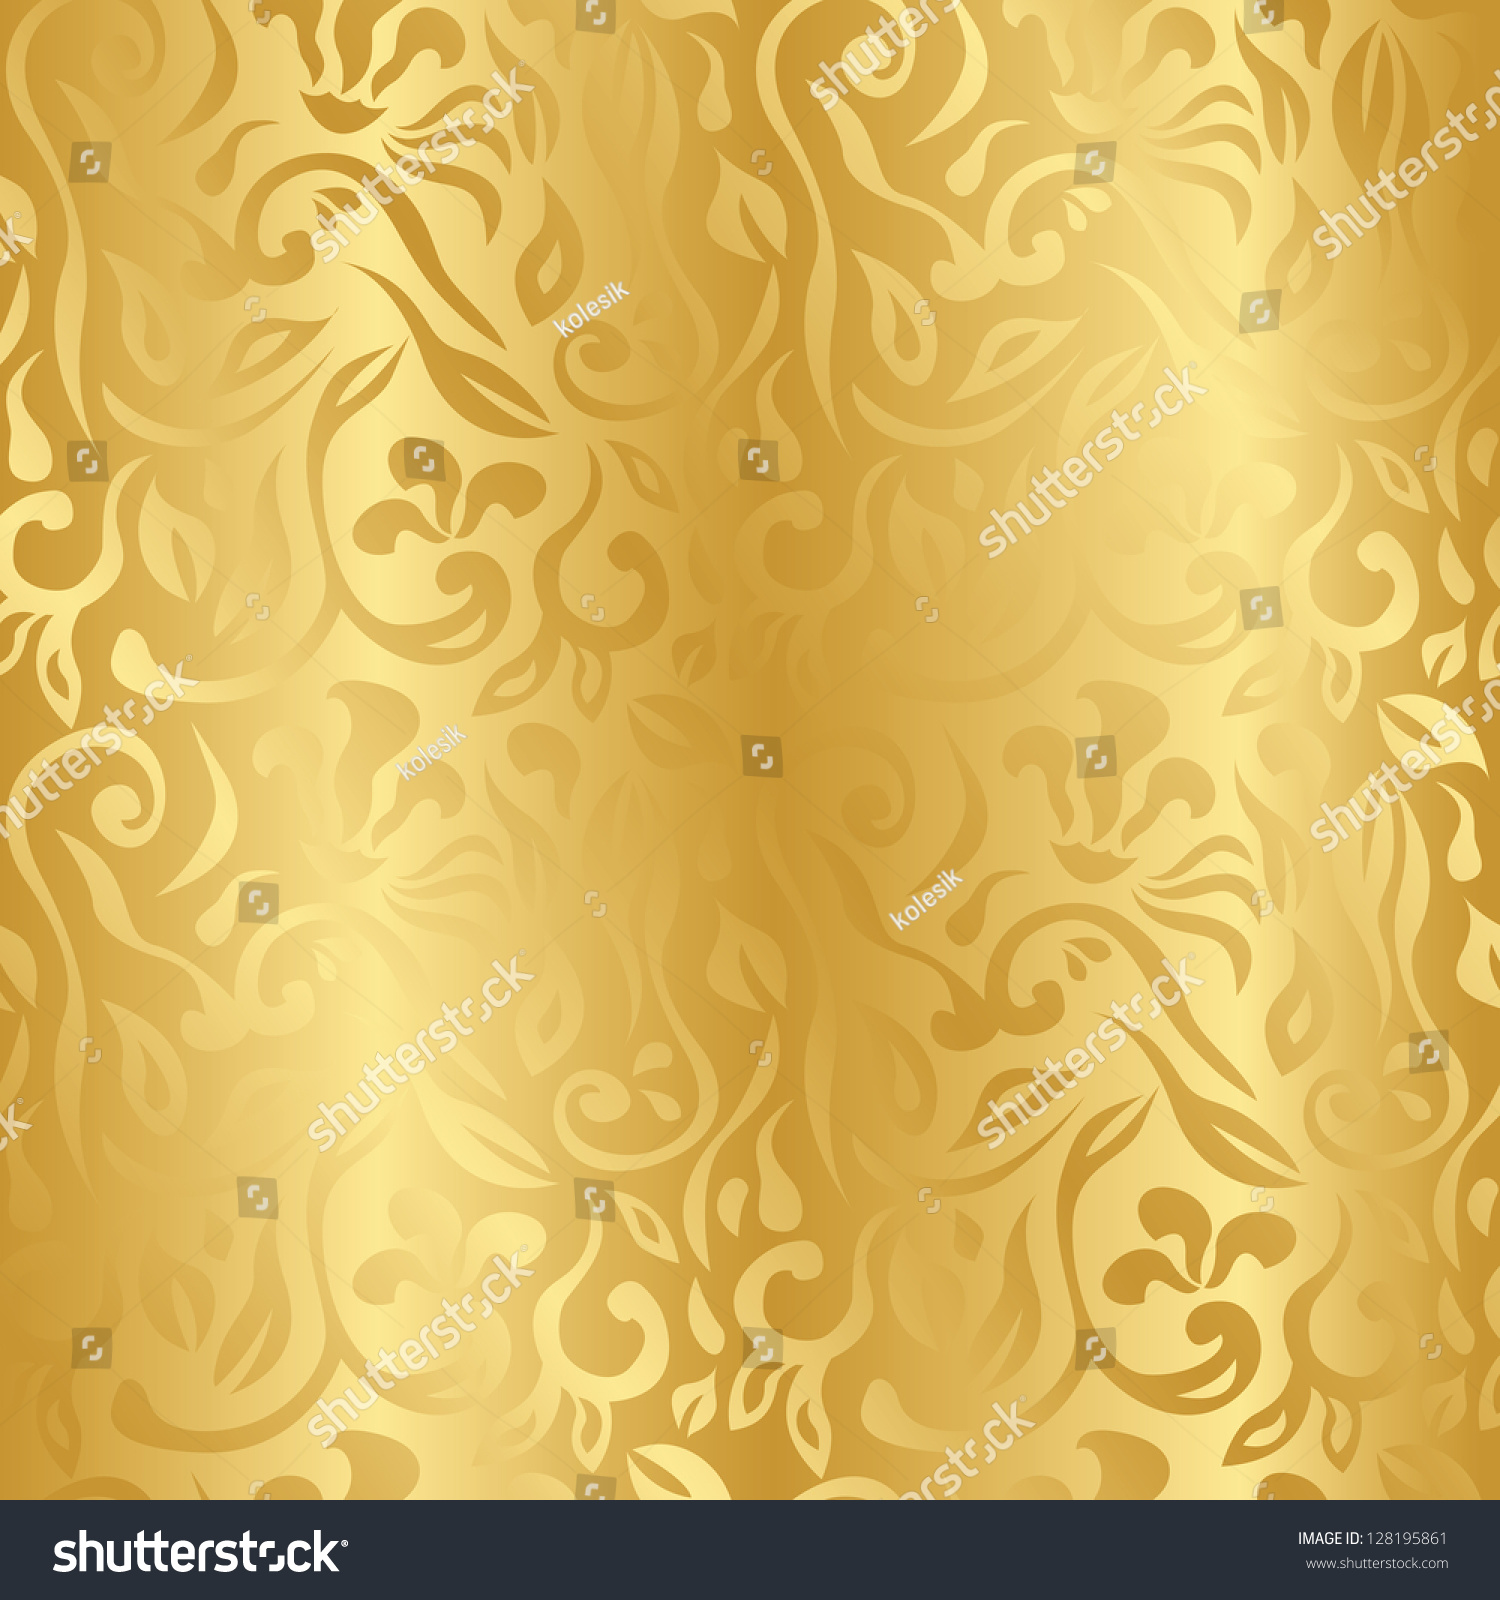 Seamless Vintage Floral Background Gold Seamless Stock Vector